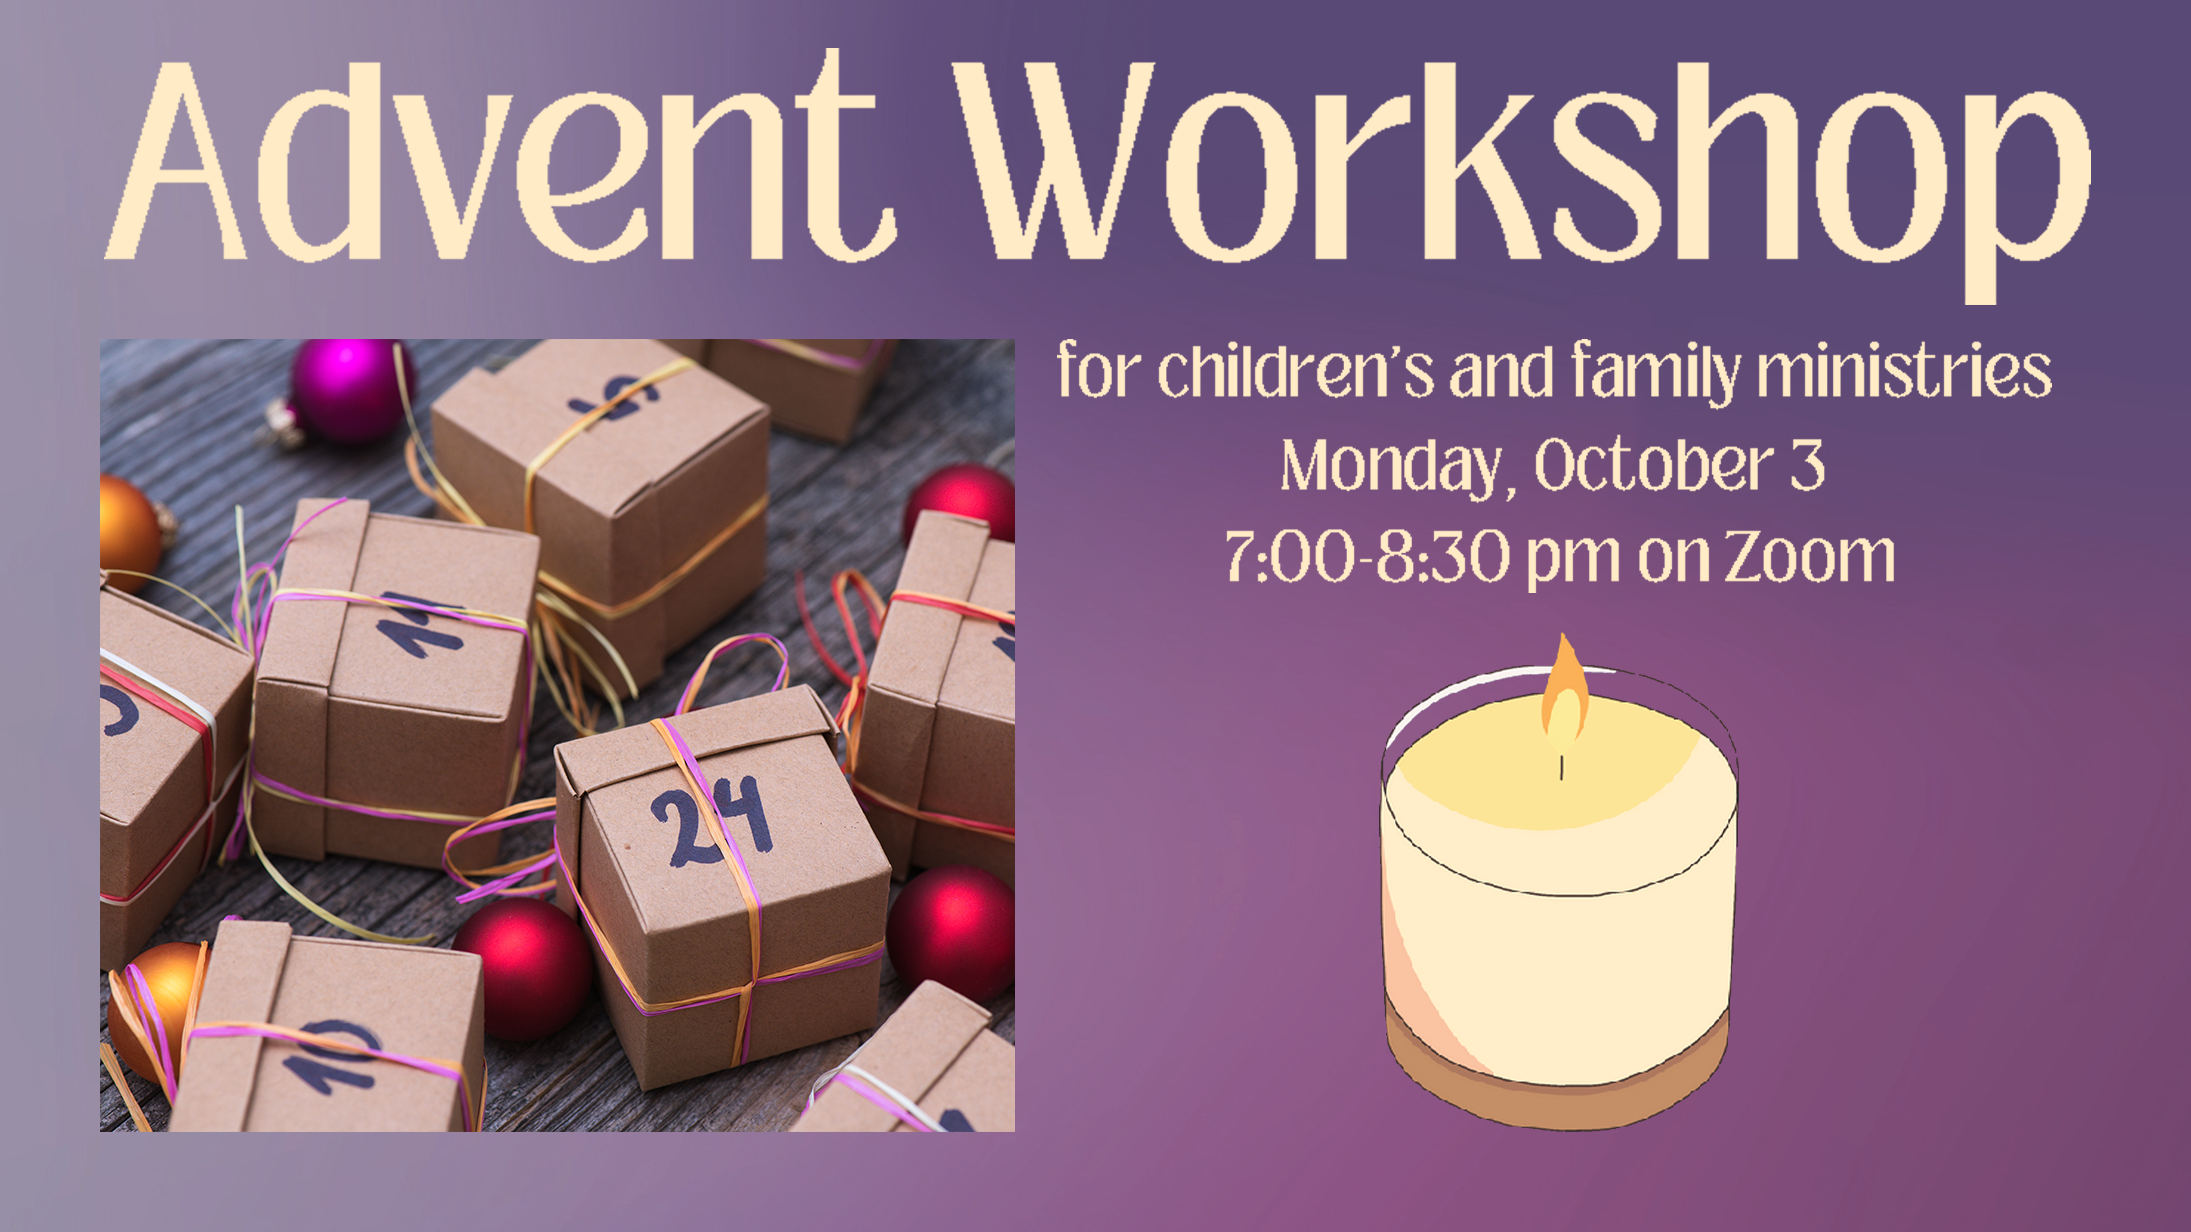 Featured image for “Advent planning workshop for children, family ministries, Oct. 3 via Zoom”